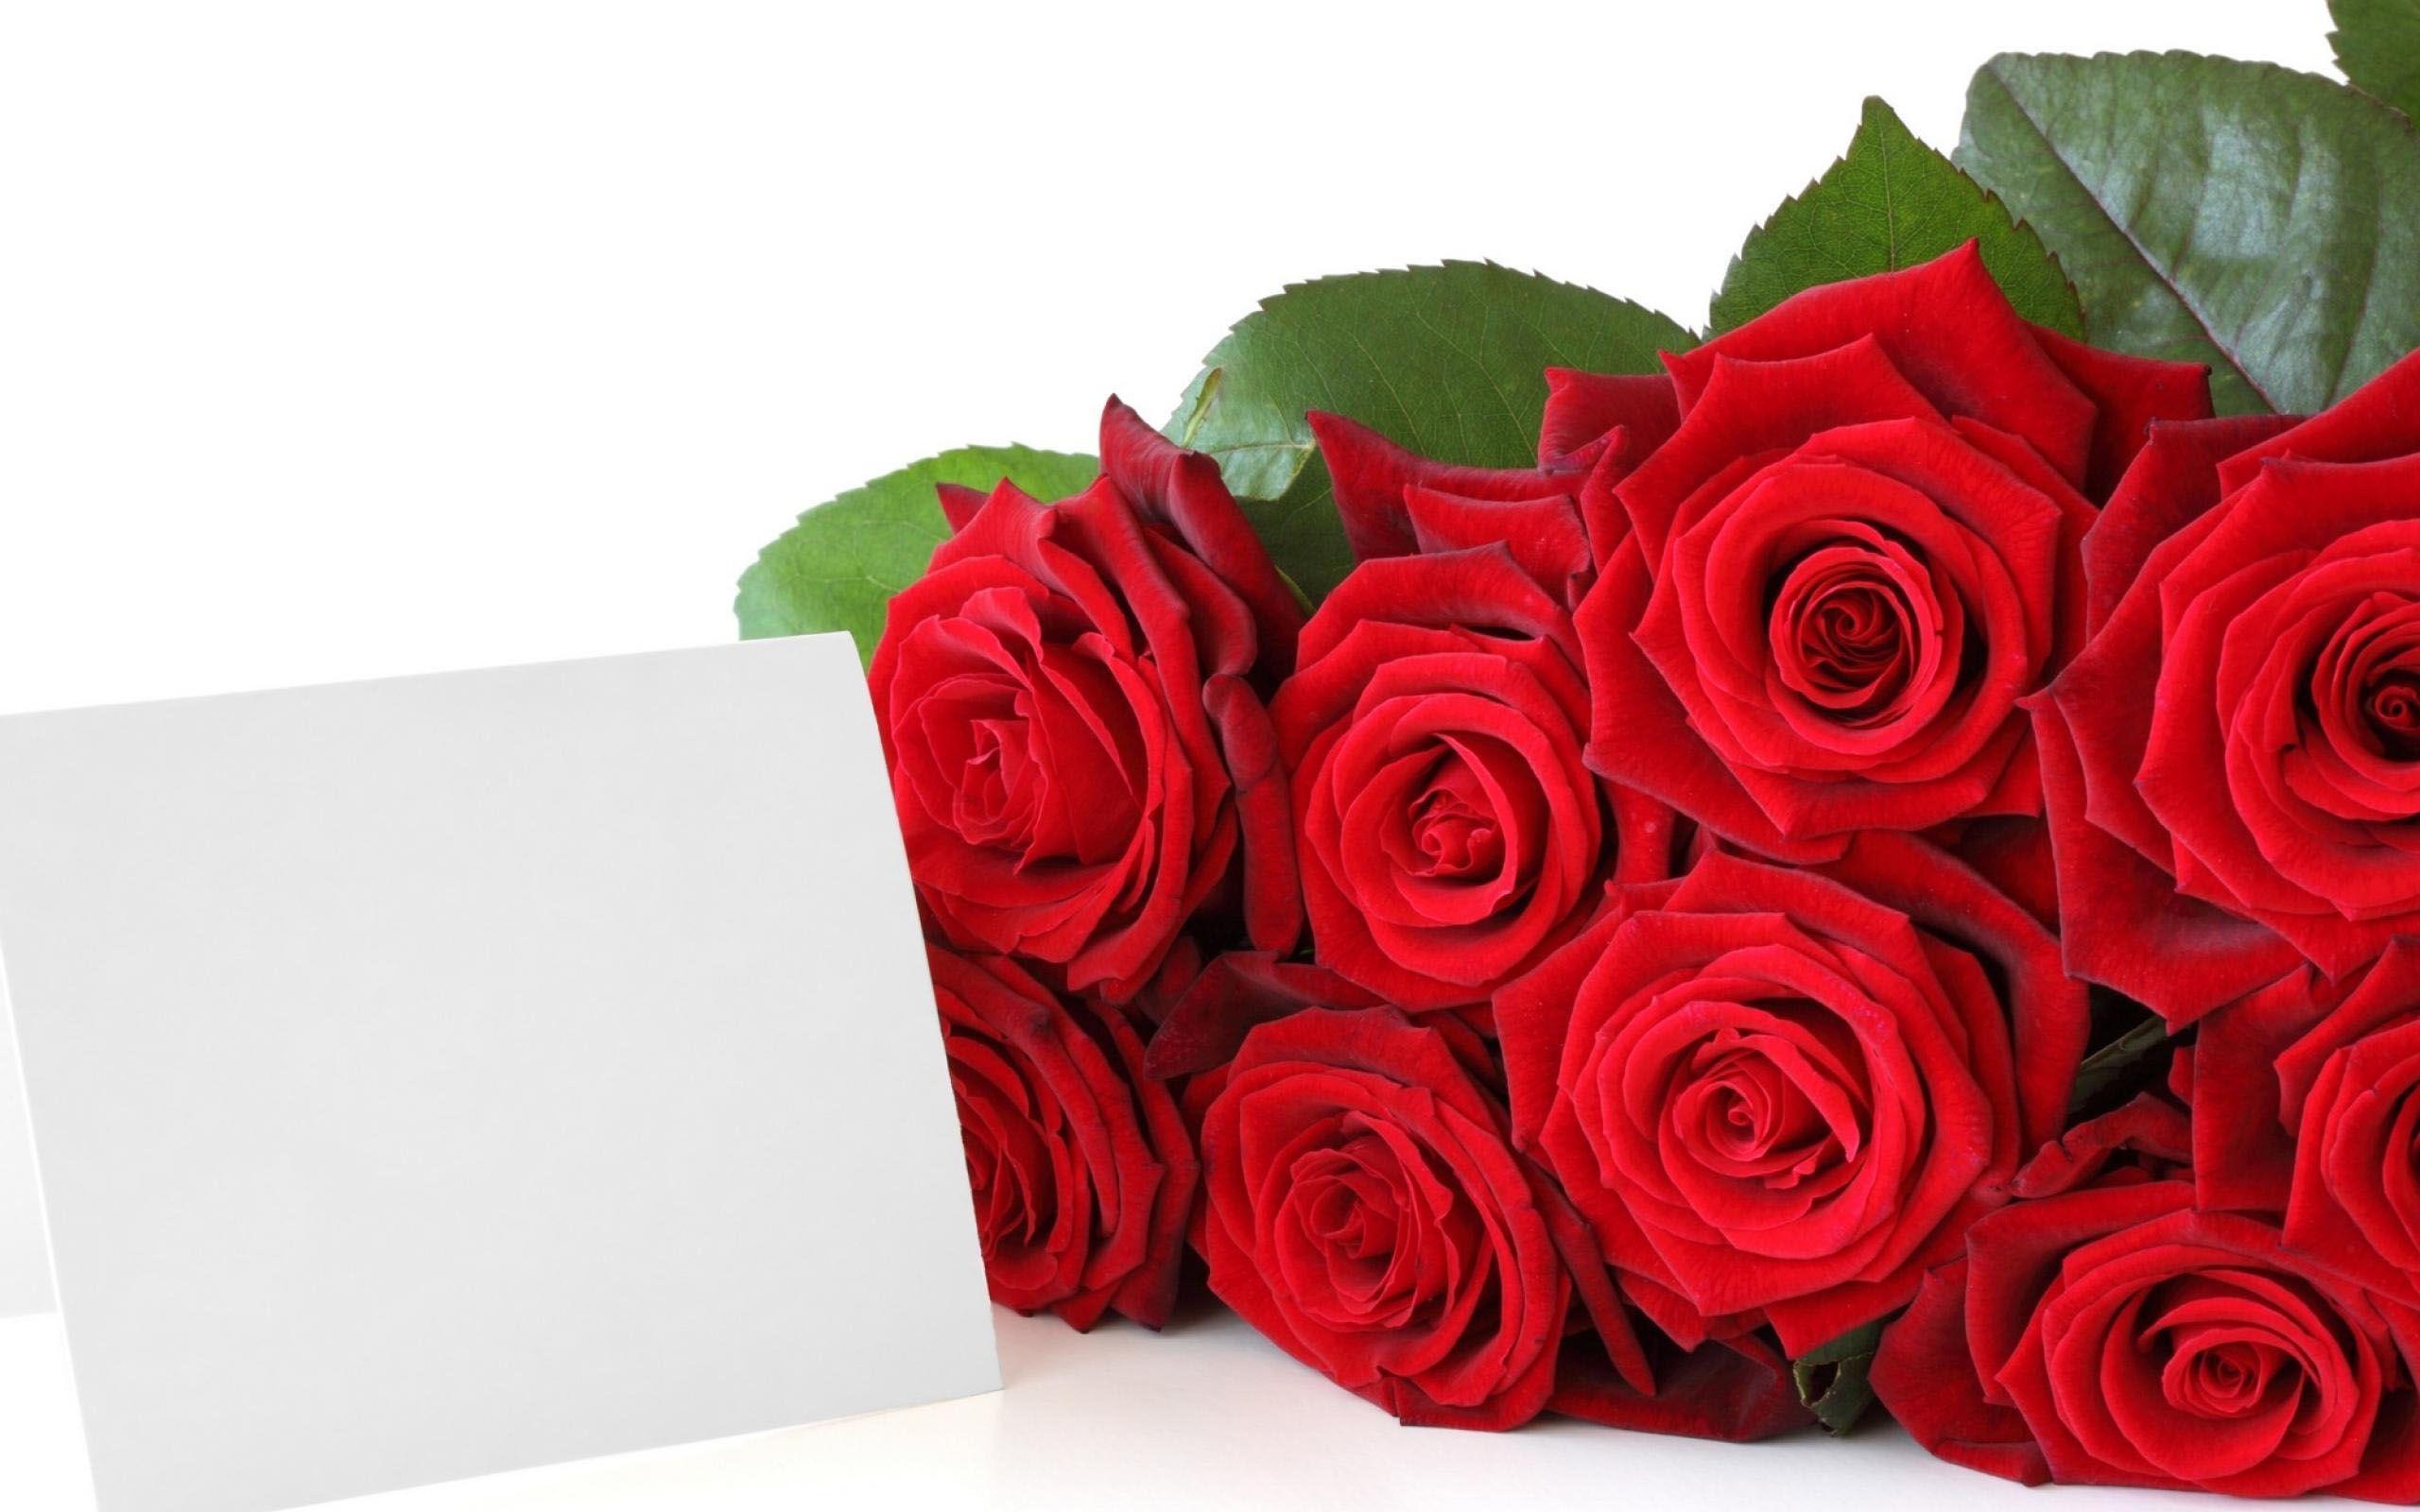 Red Roses Picture Free Download Wallpaper